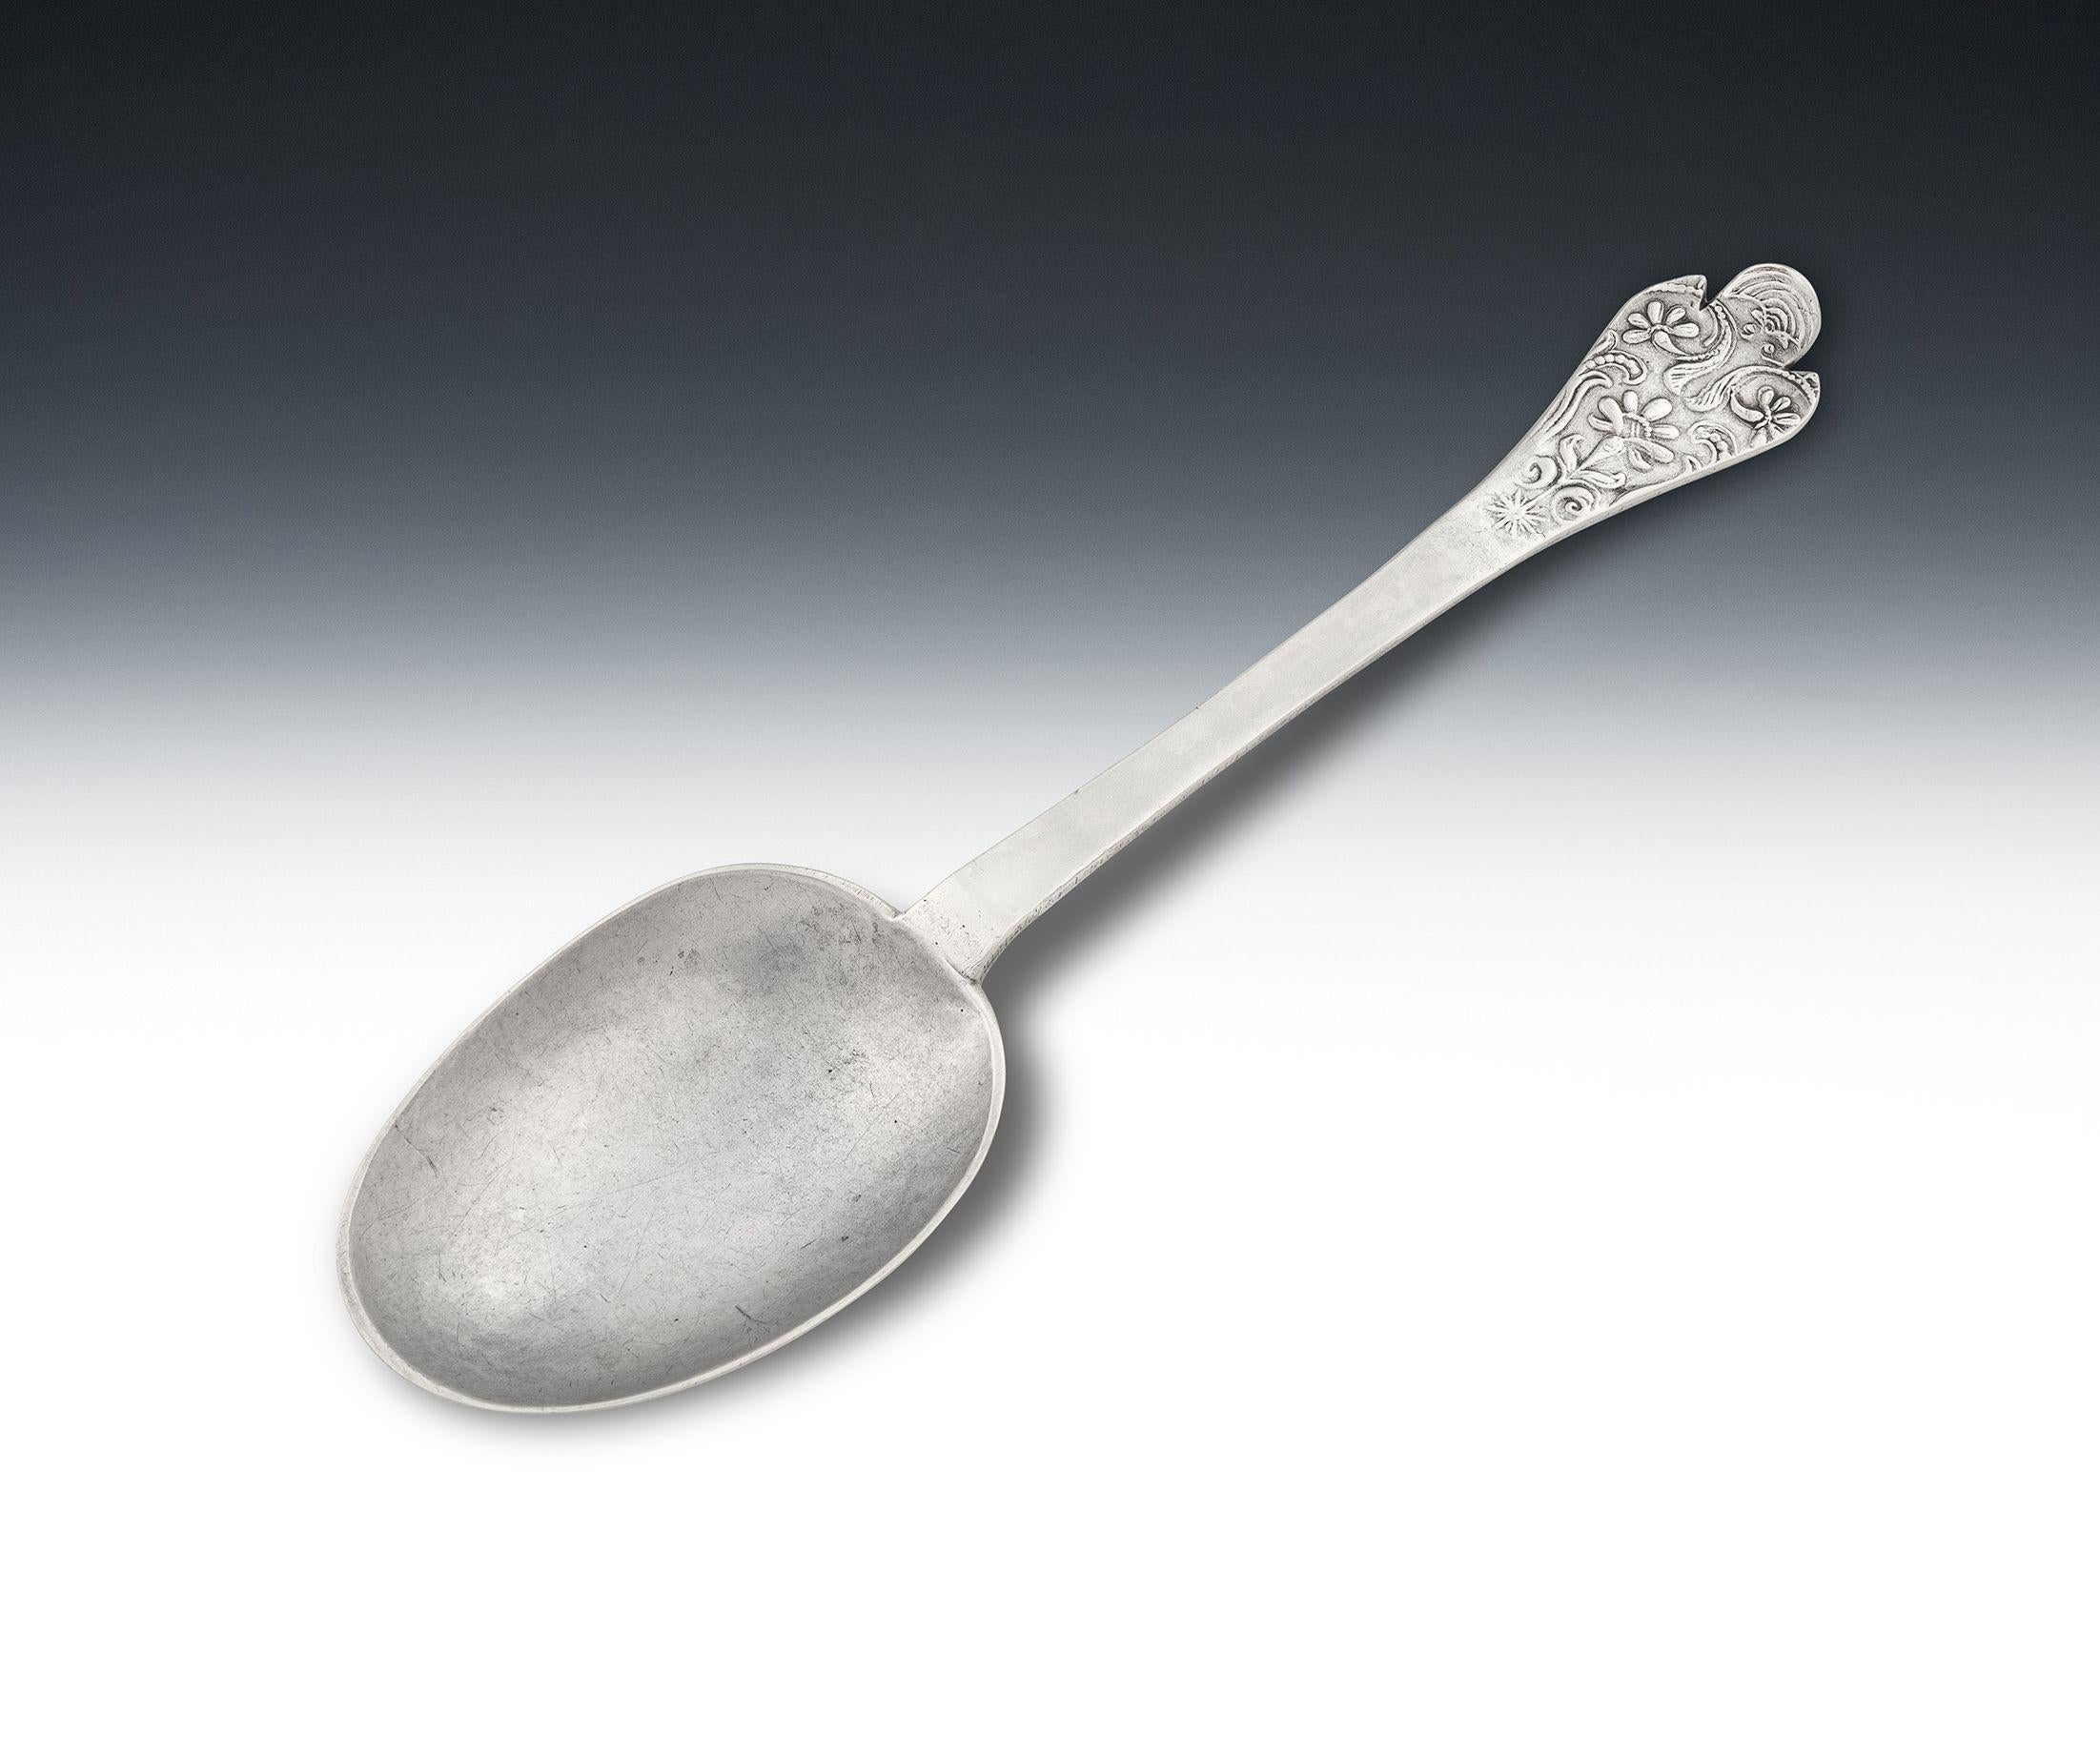 An Exceptional Early Queen Anne West Country Laceback Trefid Betrothal Spoon Made in Chard circa 1703/04 by Richard Sweet II.

This very special spoon is modelled in the trefid style and displays a large bowl with central rat tail surrounded by lace